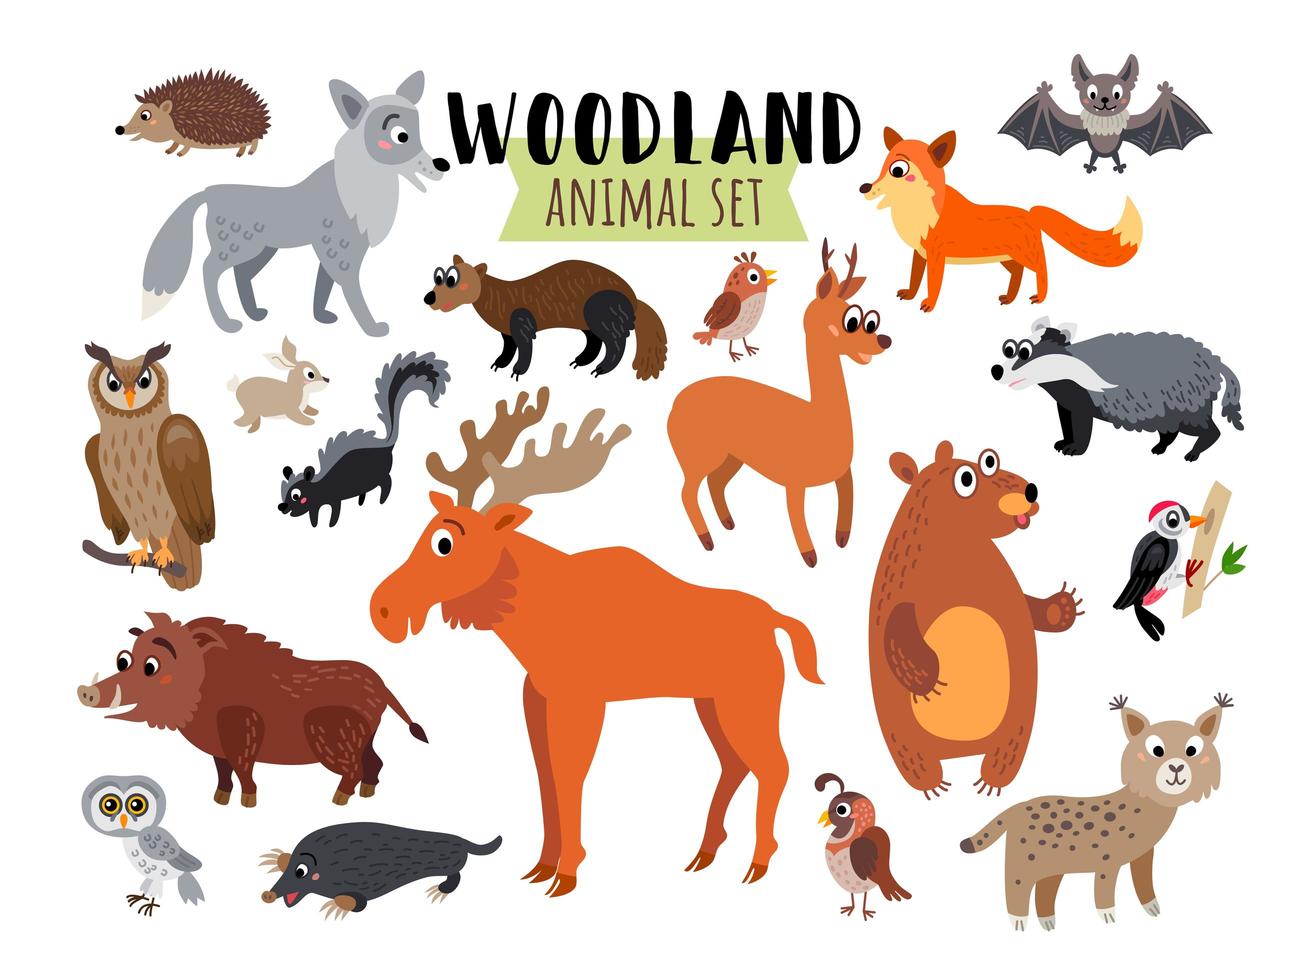 Woodland Forest Animals set isolated on white vector